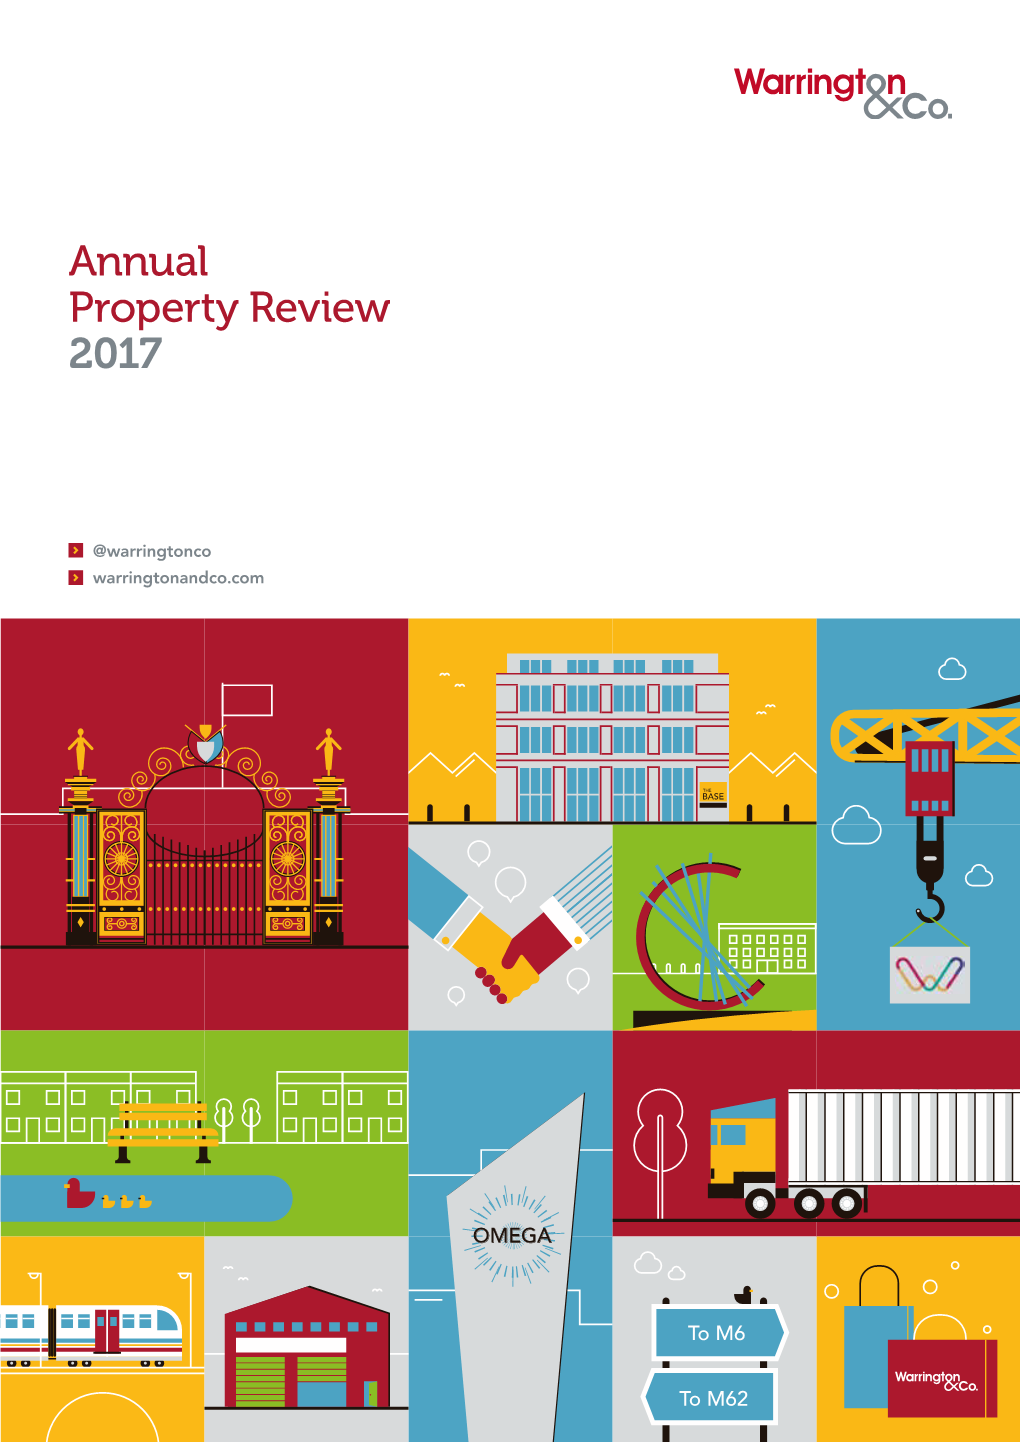 Annual Property Review 2017